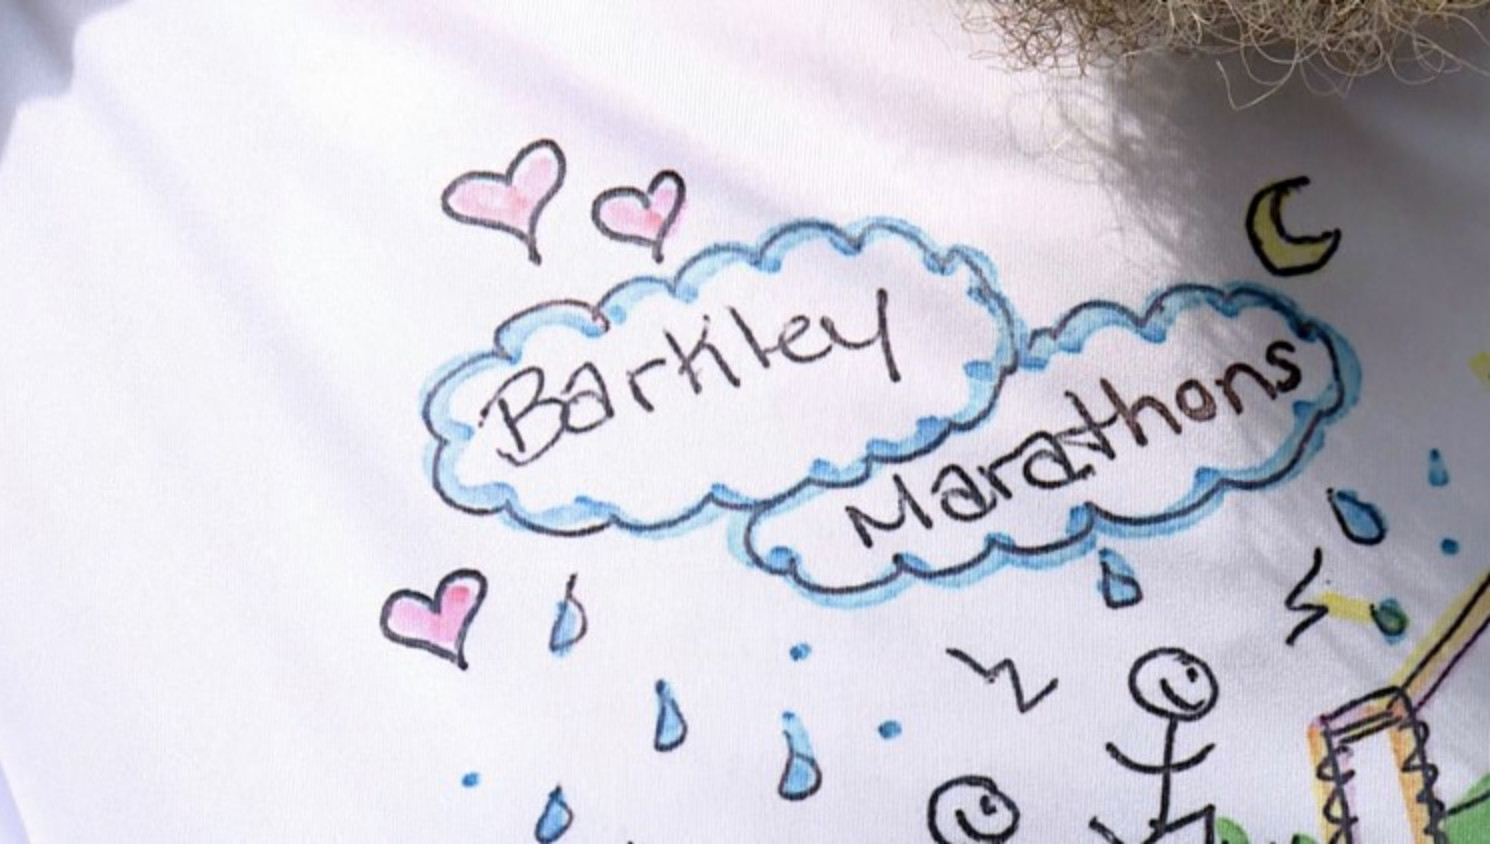 2019 Barkley Marathons is 'love and puppies' for Laz